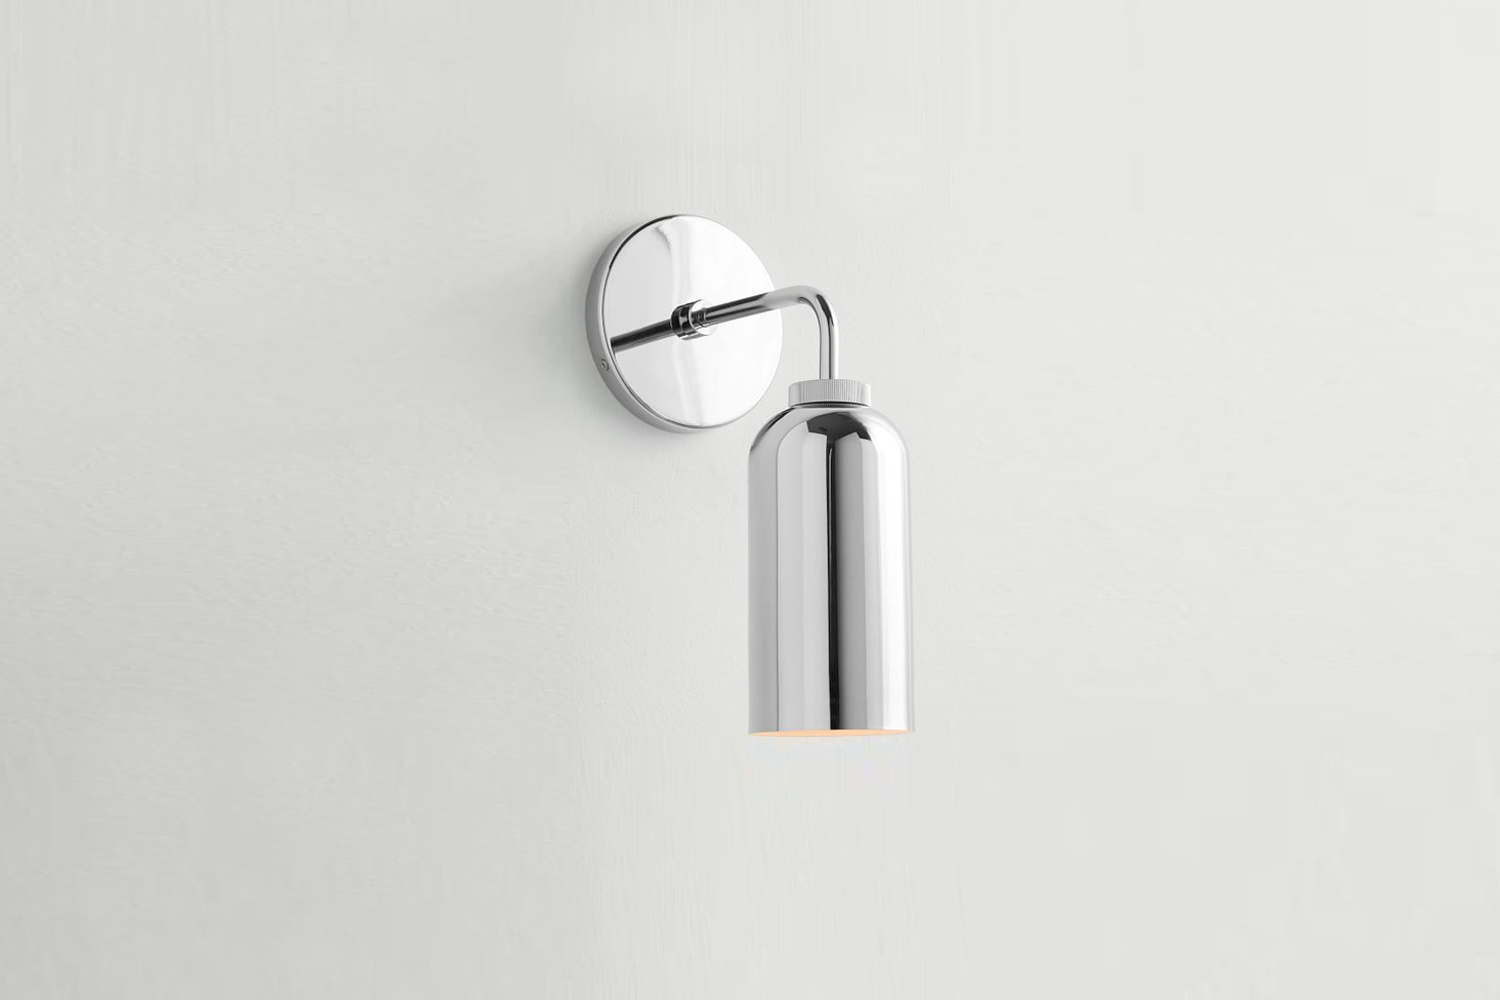 the stainless steel sconces from ikea are no longer available but a similar pro 20